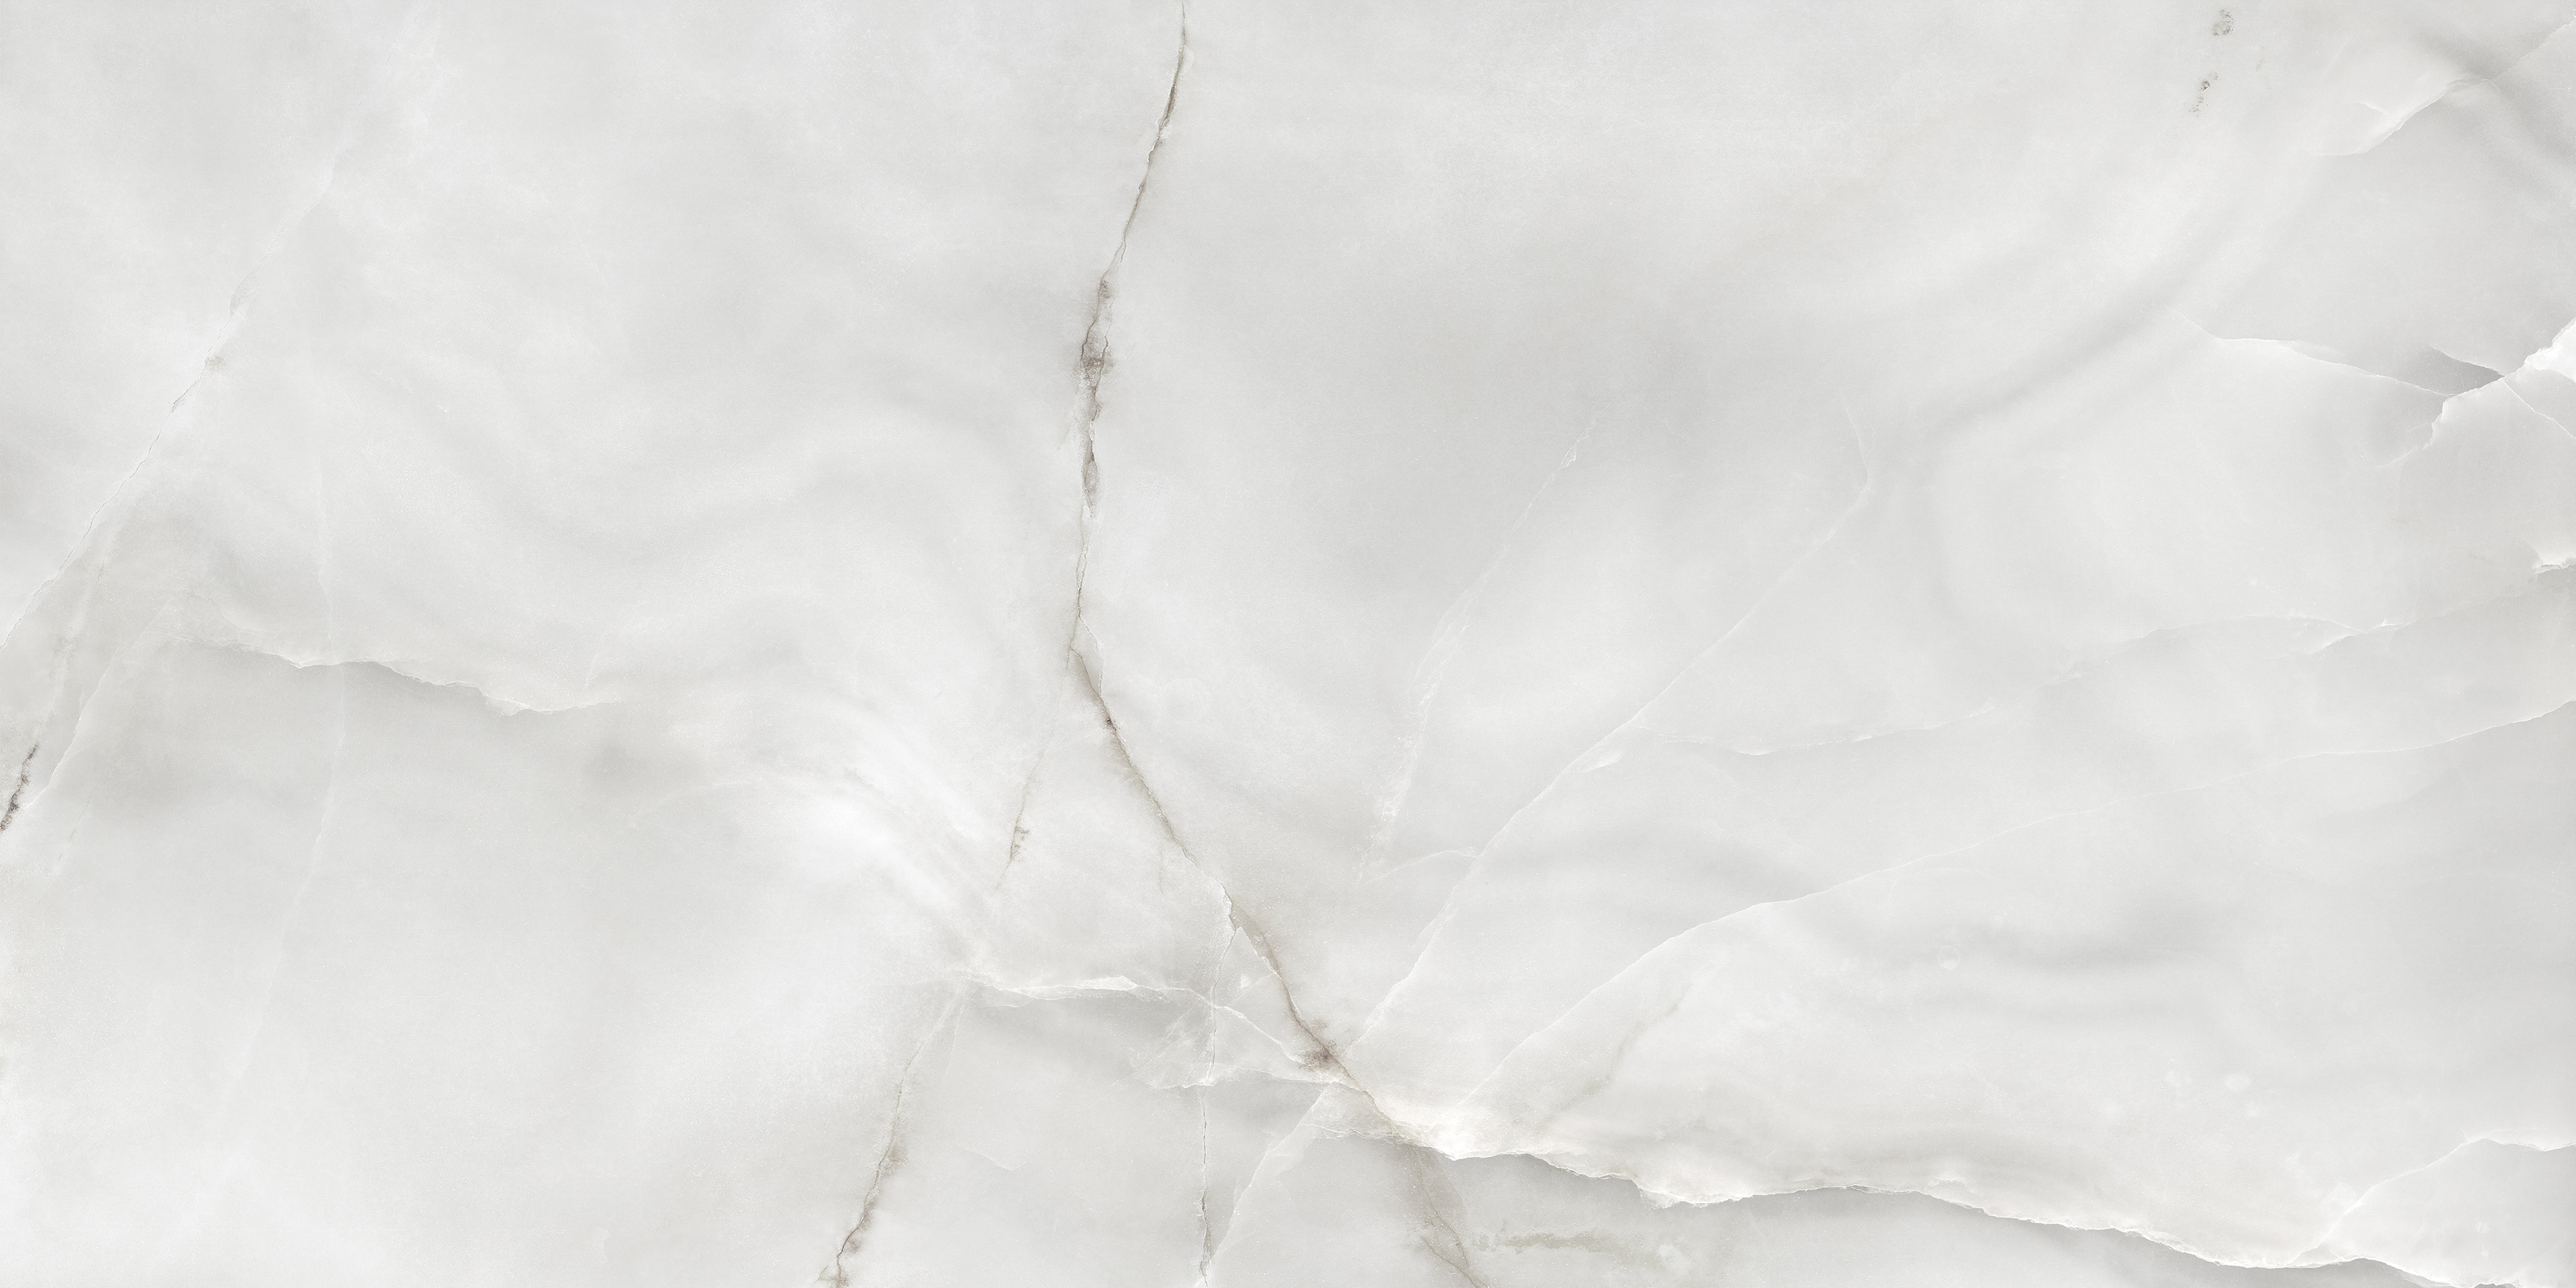 onyx nuvolato pattern glazed porcelain field tile from la marca anatolia collection distributed by surface group international polished finish rectified edge 24x48 rectangle shape